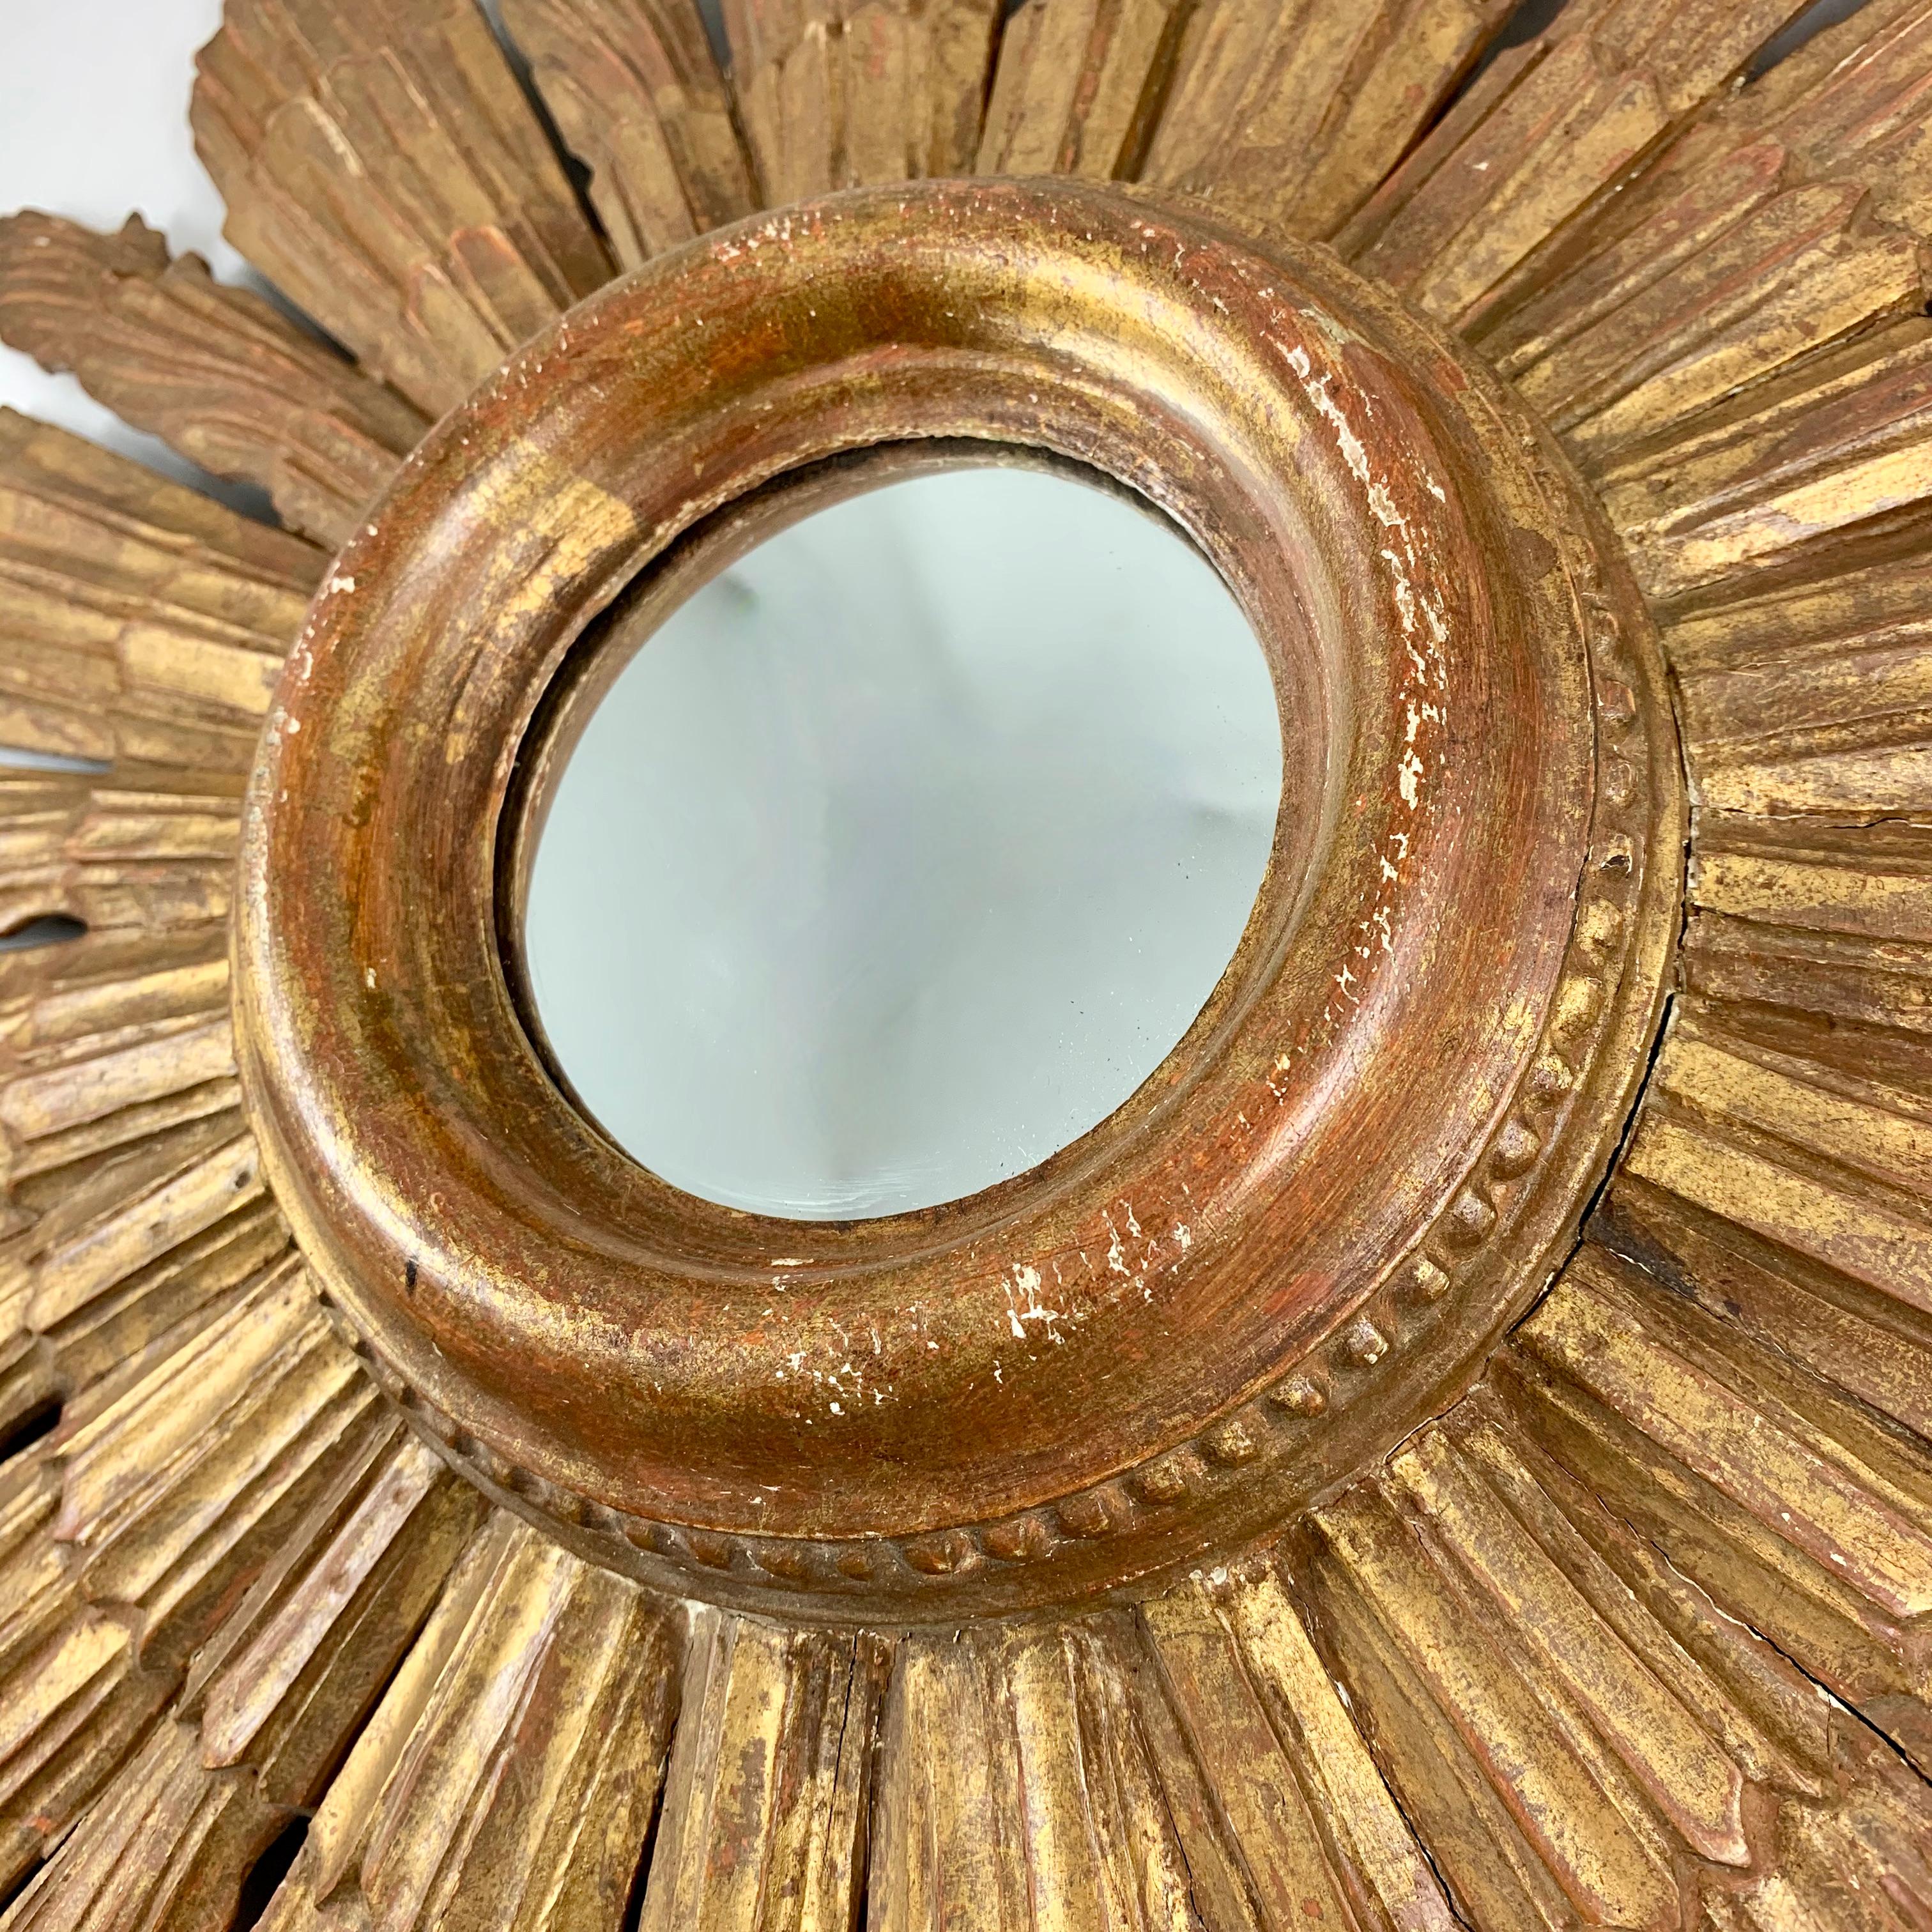 A large Hollywood Regency period wall mirror, showing a giltwood sunburst with a raised and beaded bezel, from France, circa 1920s.

Made of gilded and gesso on wood, the mirror is set in a wide, raised and beaded bezel painted in gold with red